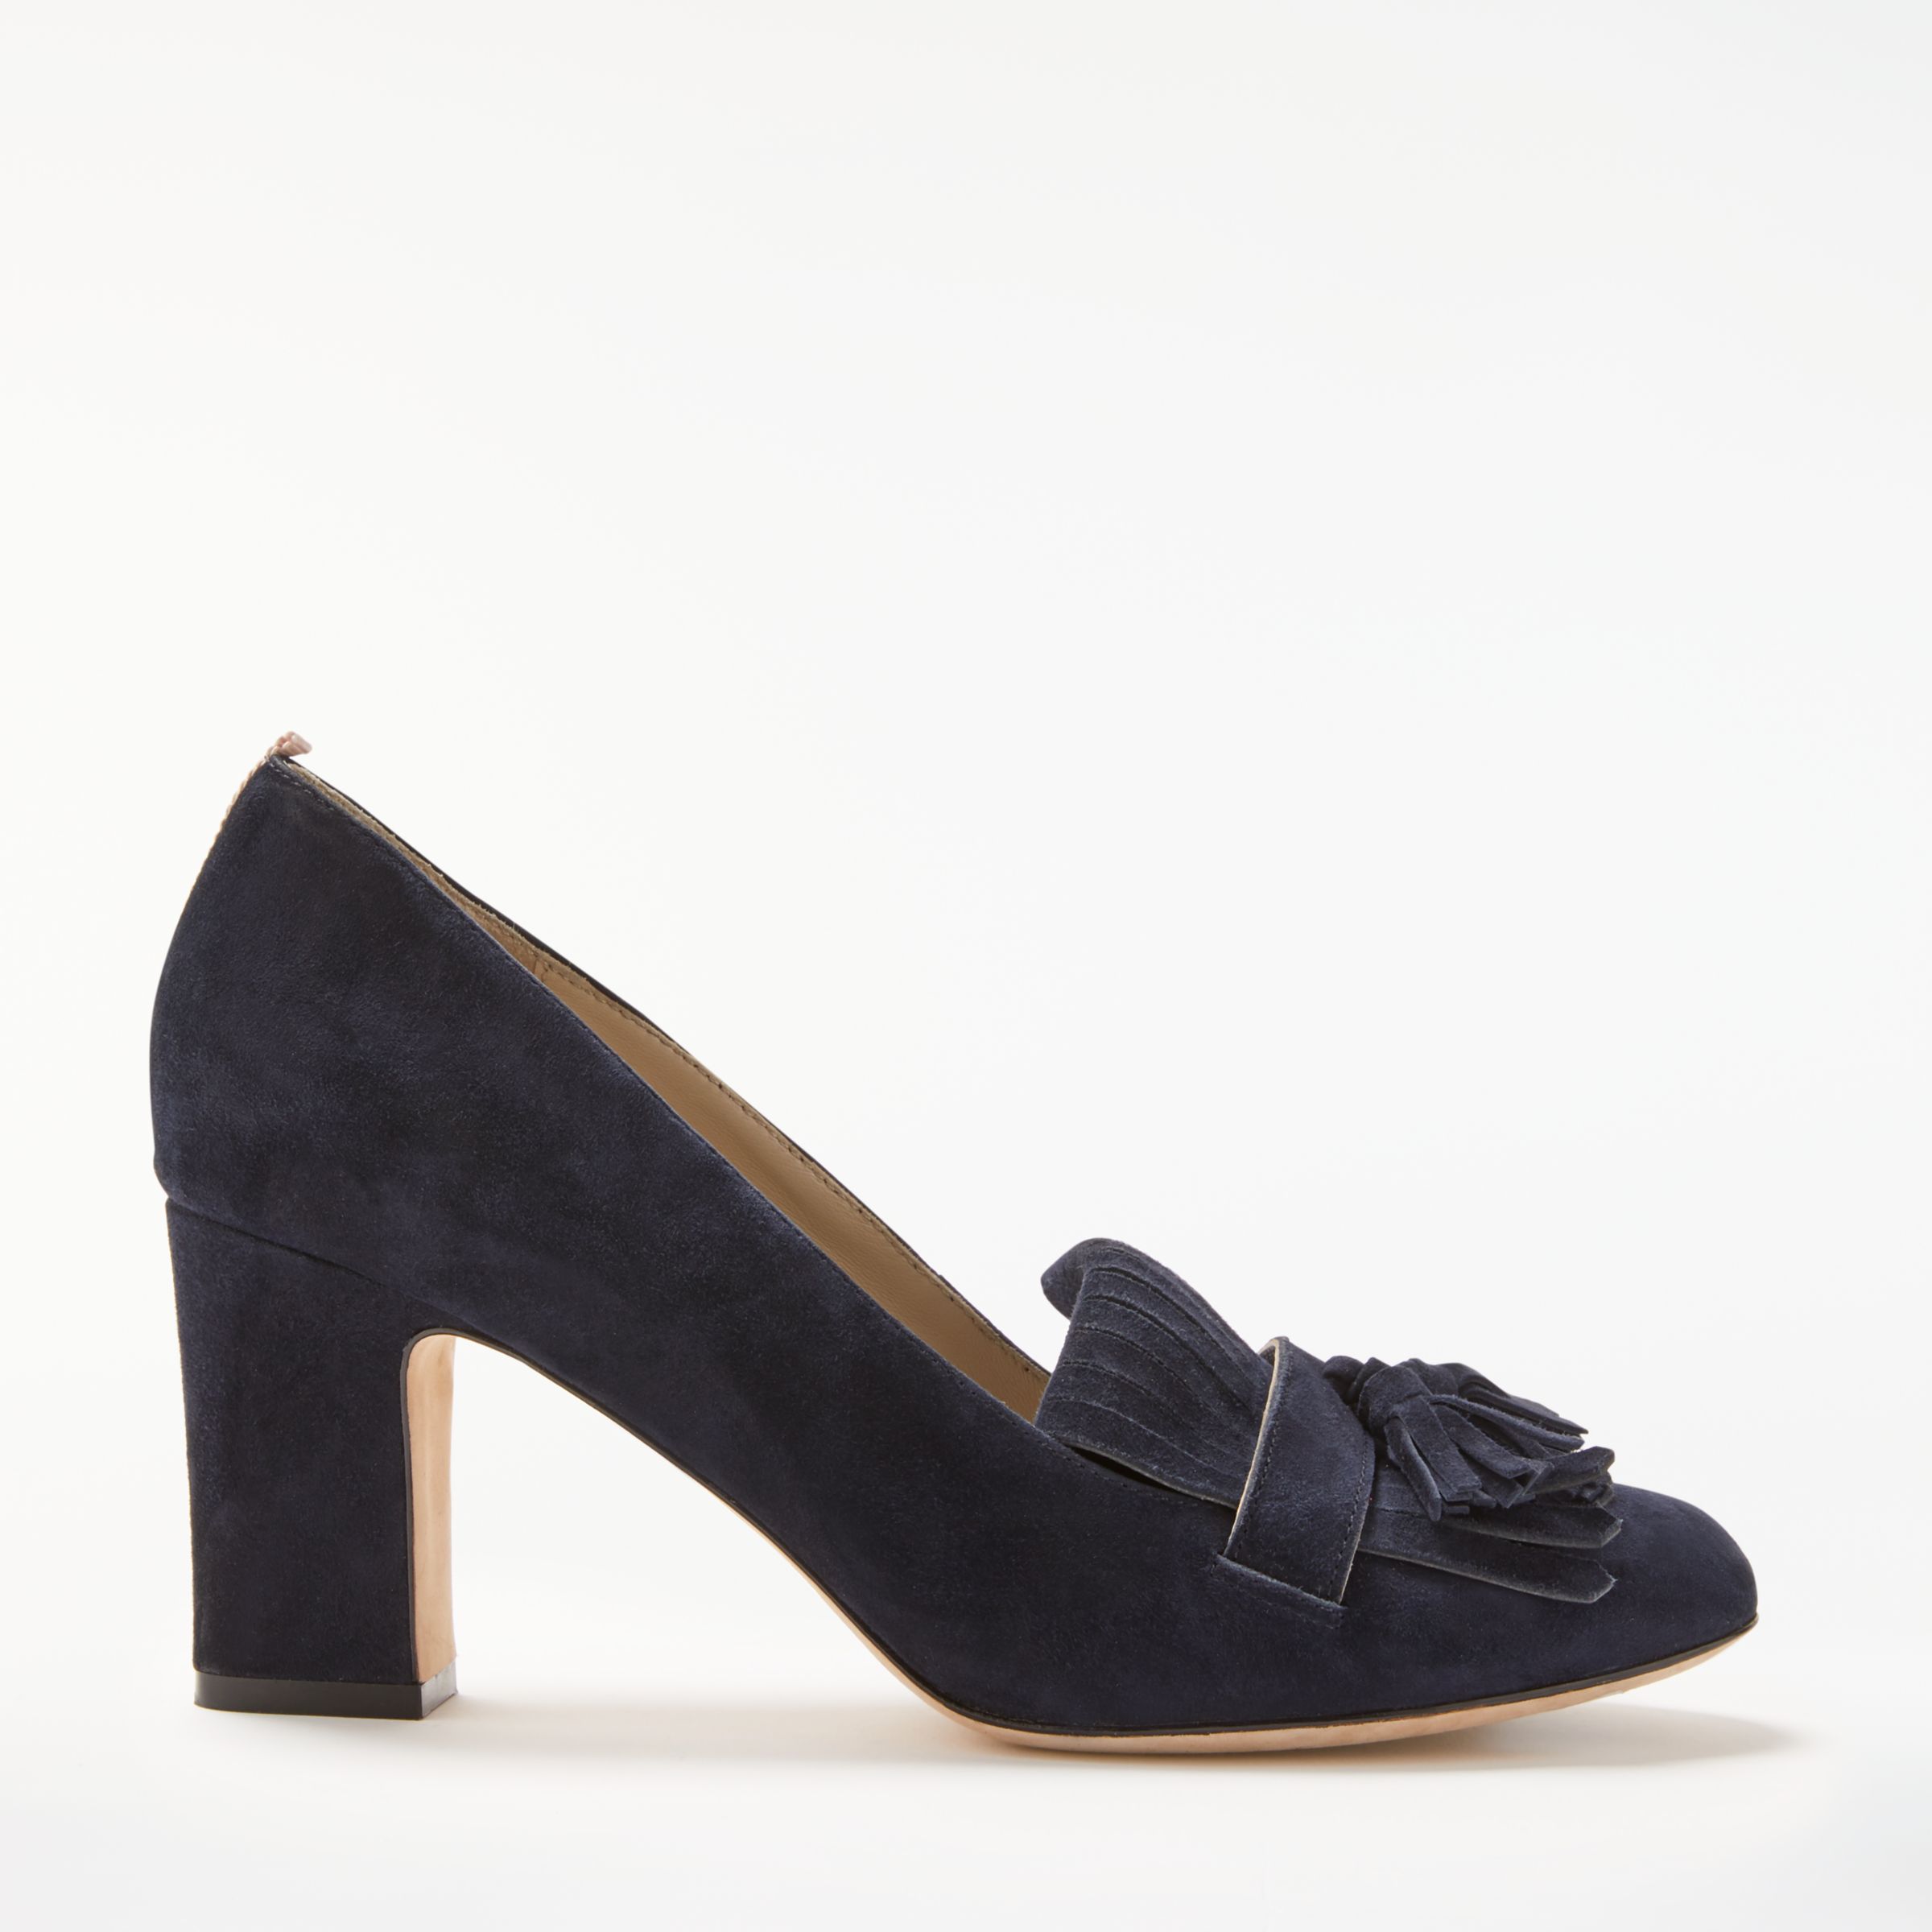 Boden Pippa Block Heeled Loafer Court Shoes, Navy Suede at John Lewis ...